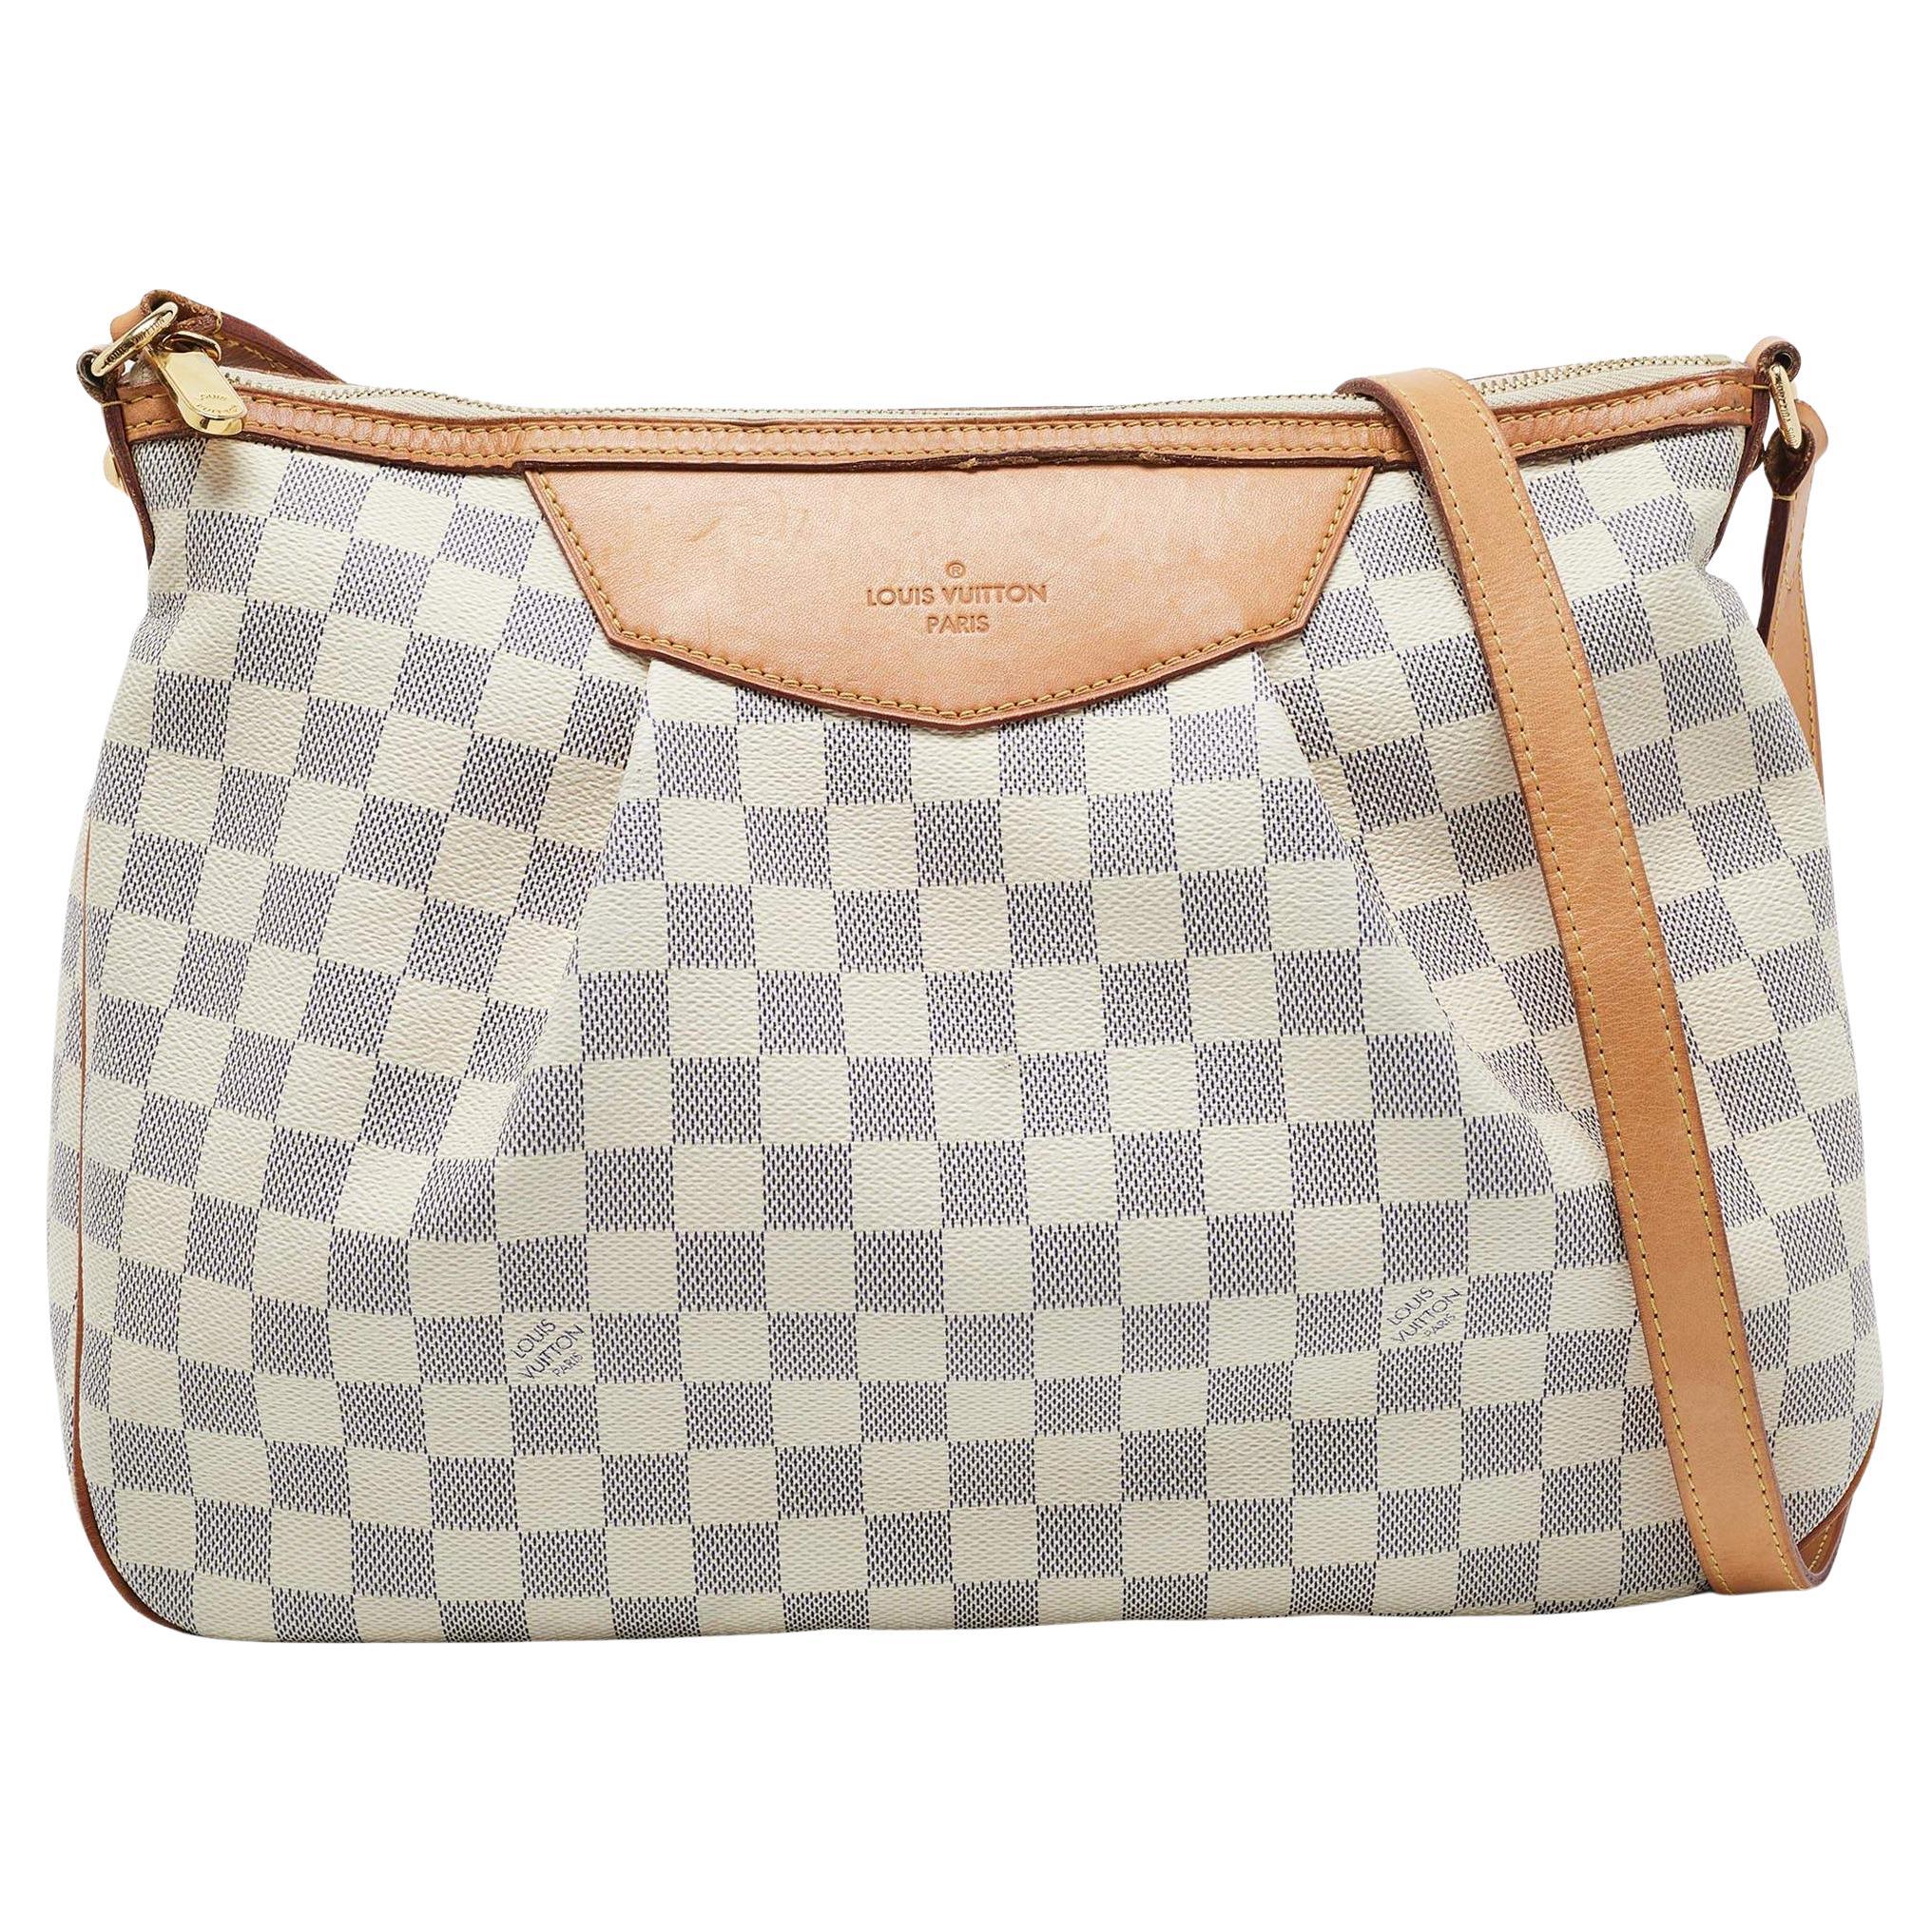 Louis Vuitton Damier Azur Canvas and Leather Siracusa MM Bag For Sale